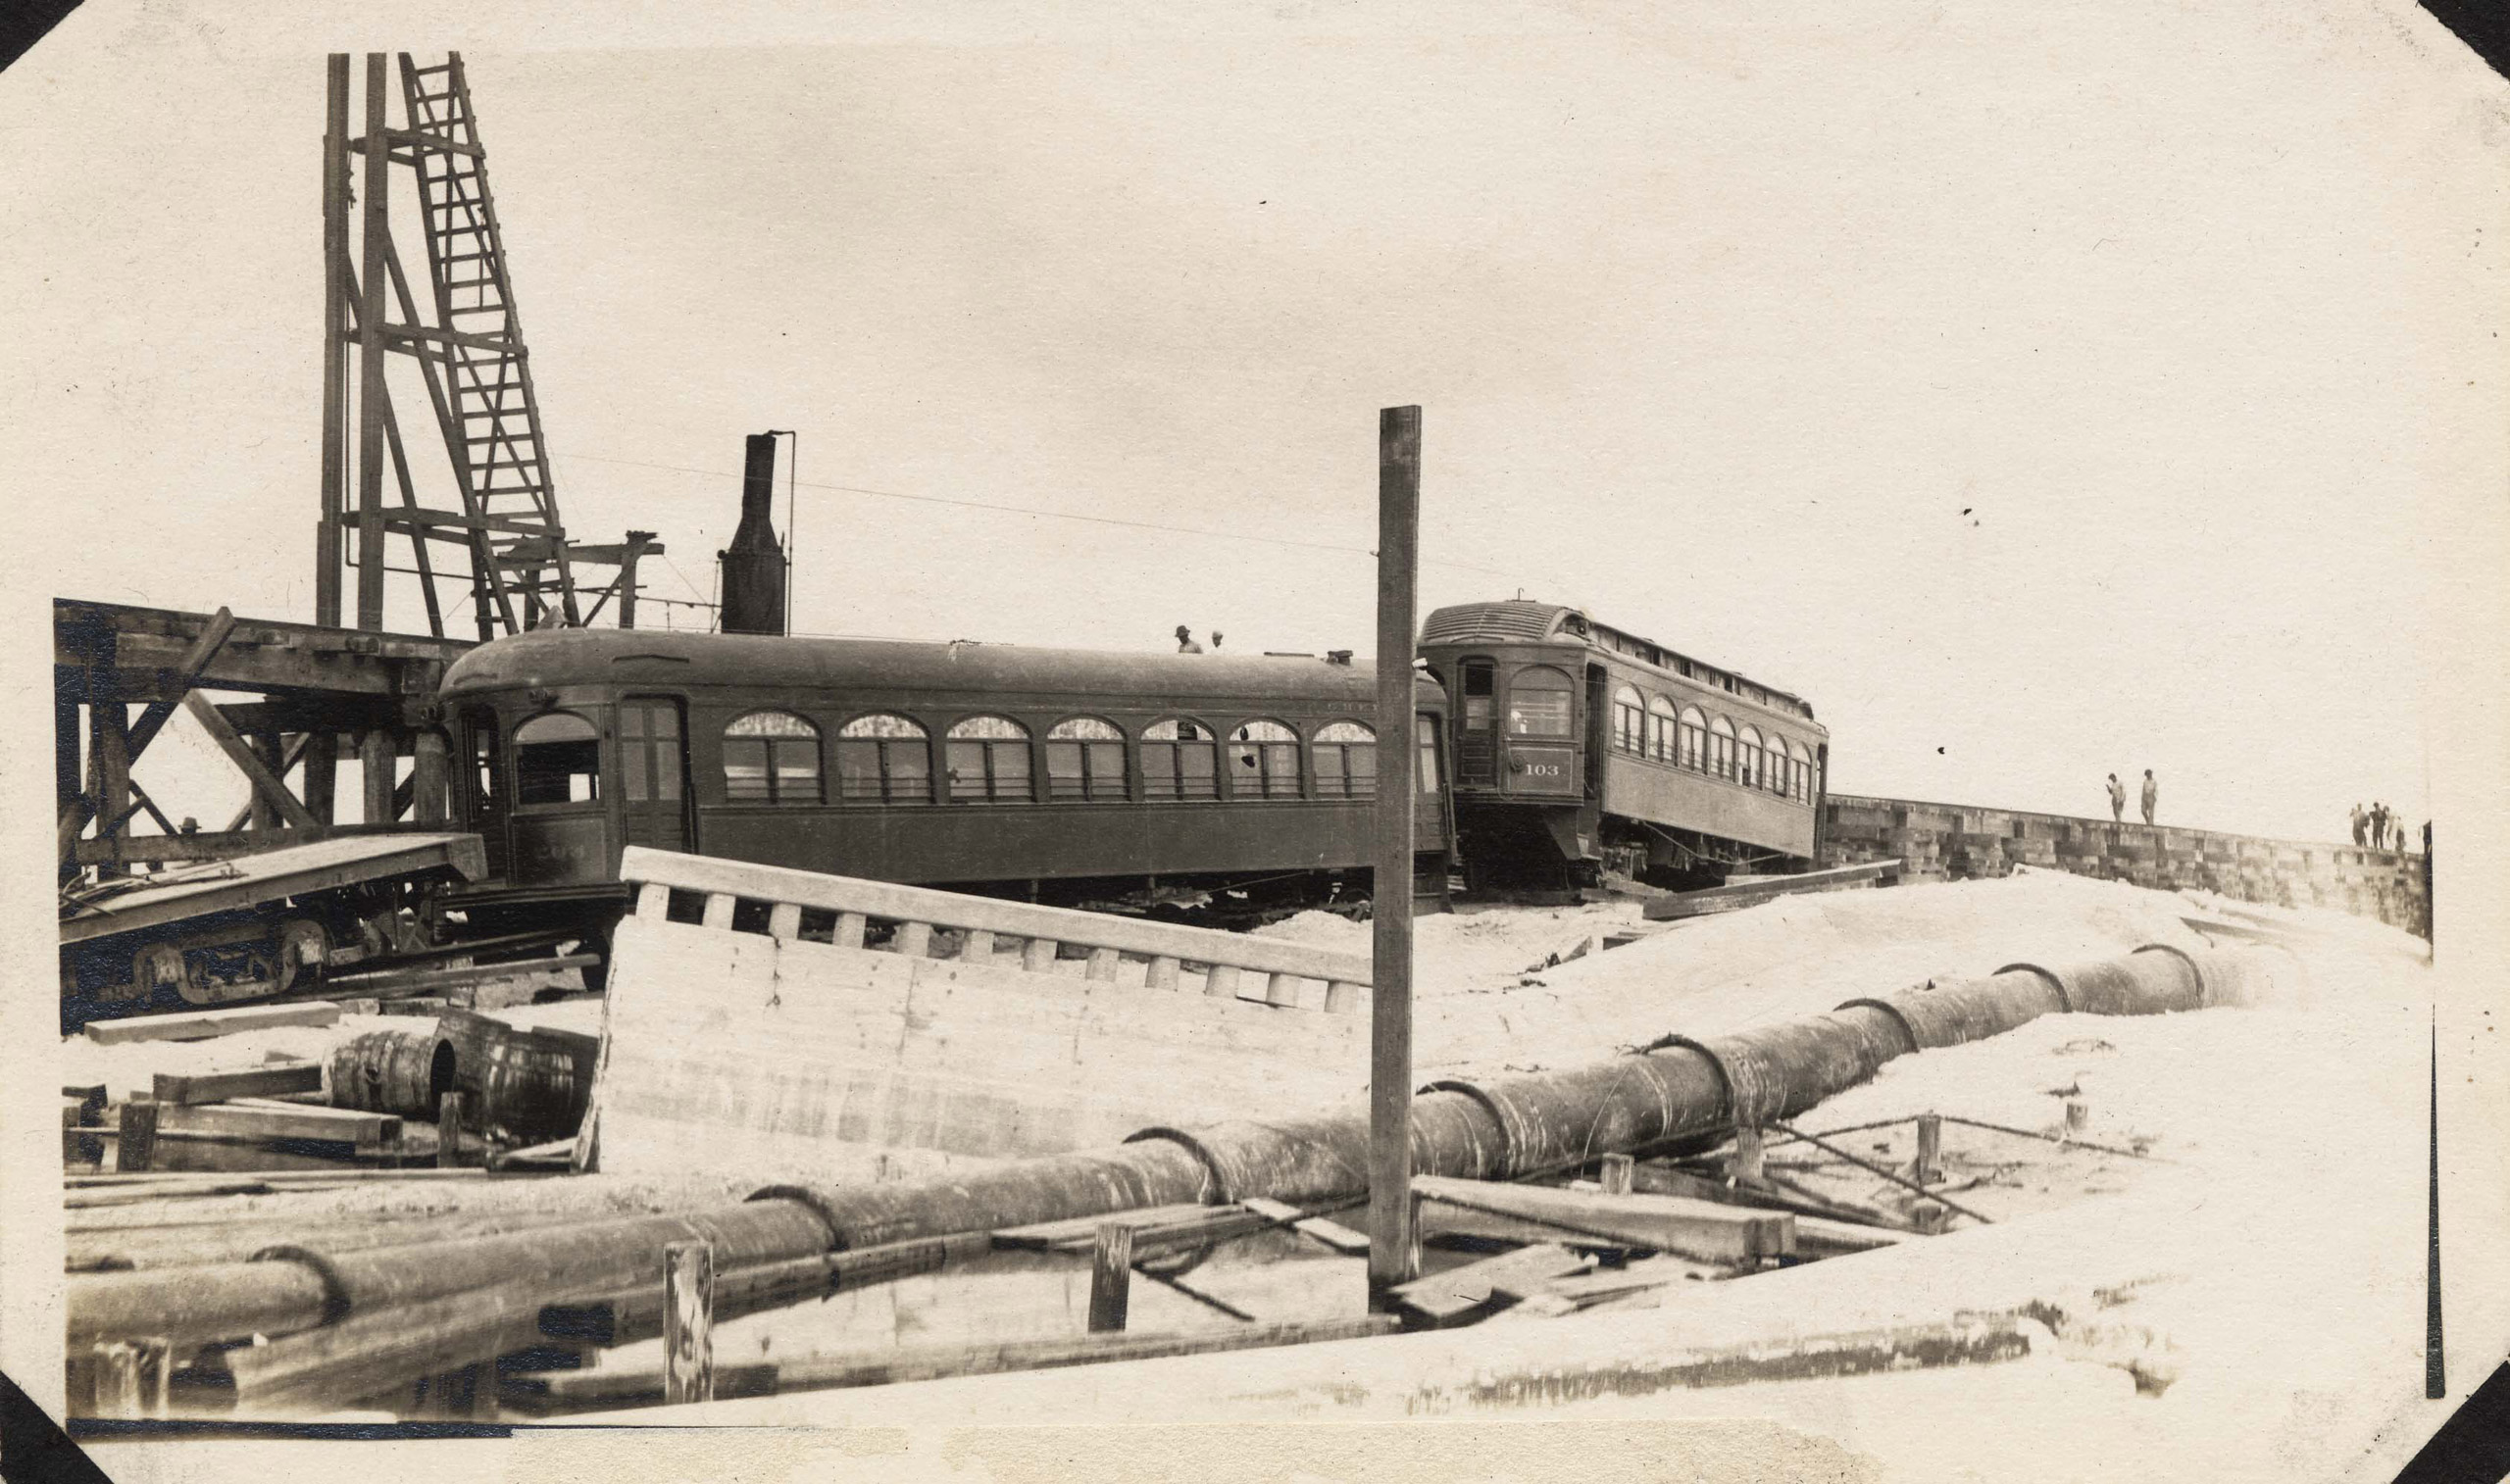 Interurban passenger cars that went down with the Causeway during the hurricane, after being righted and preparatory to lifting to the temporary trestle.